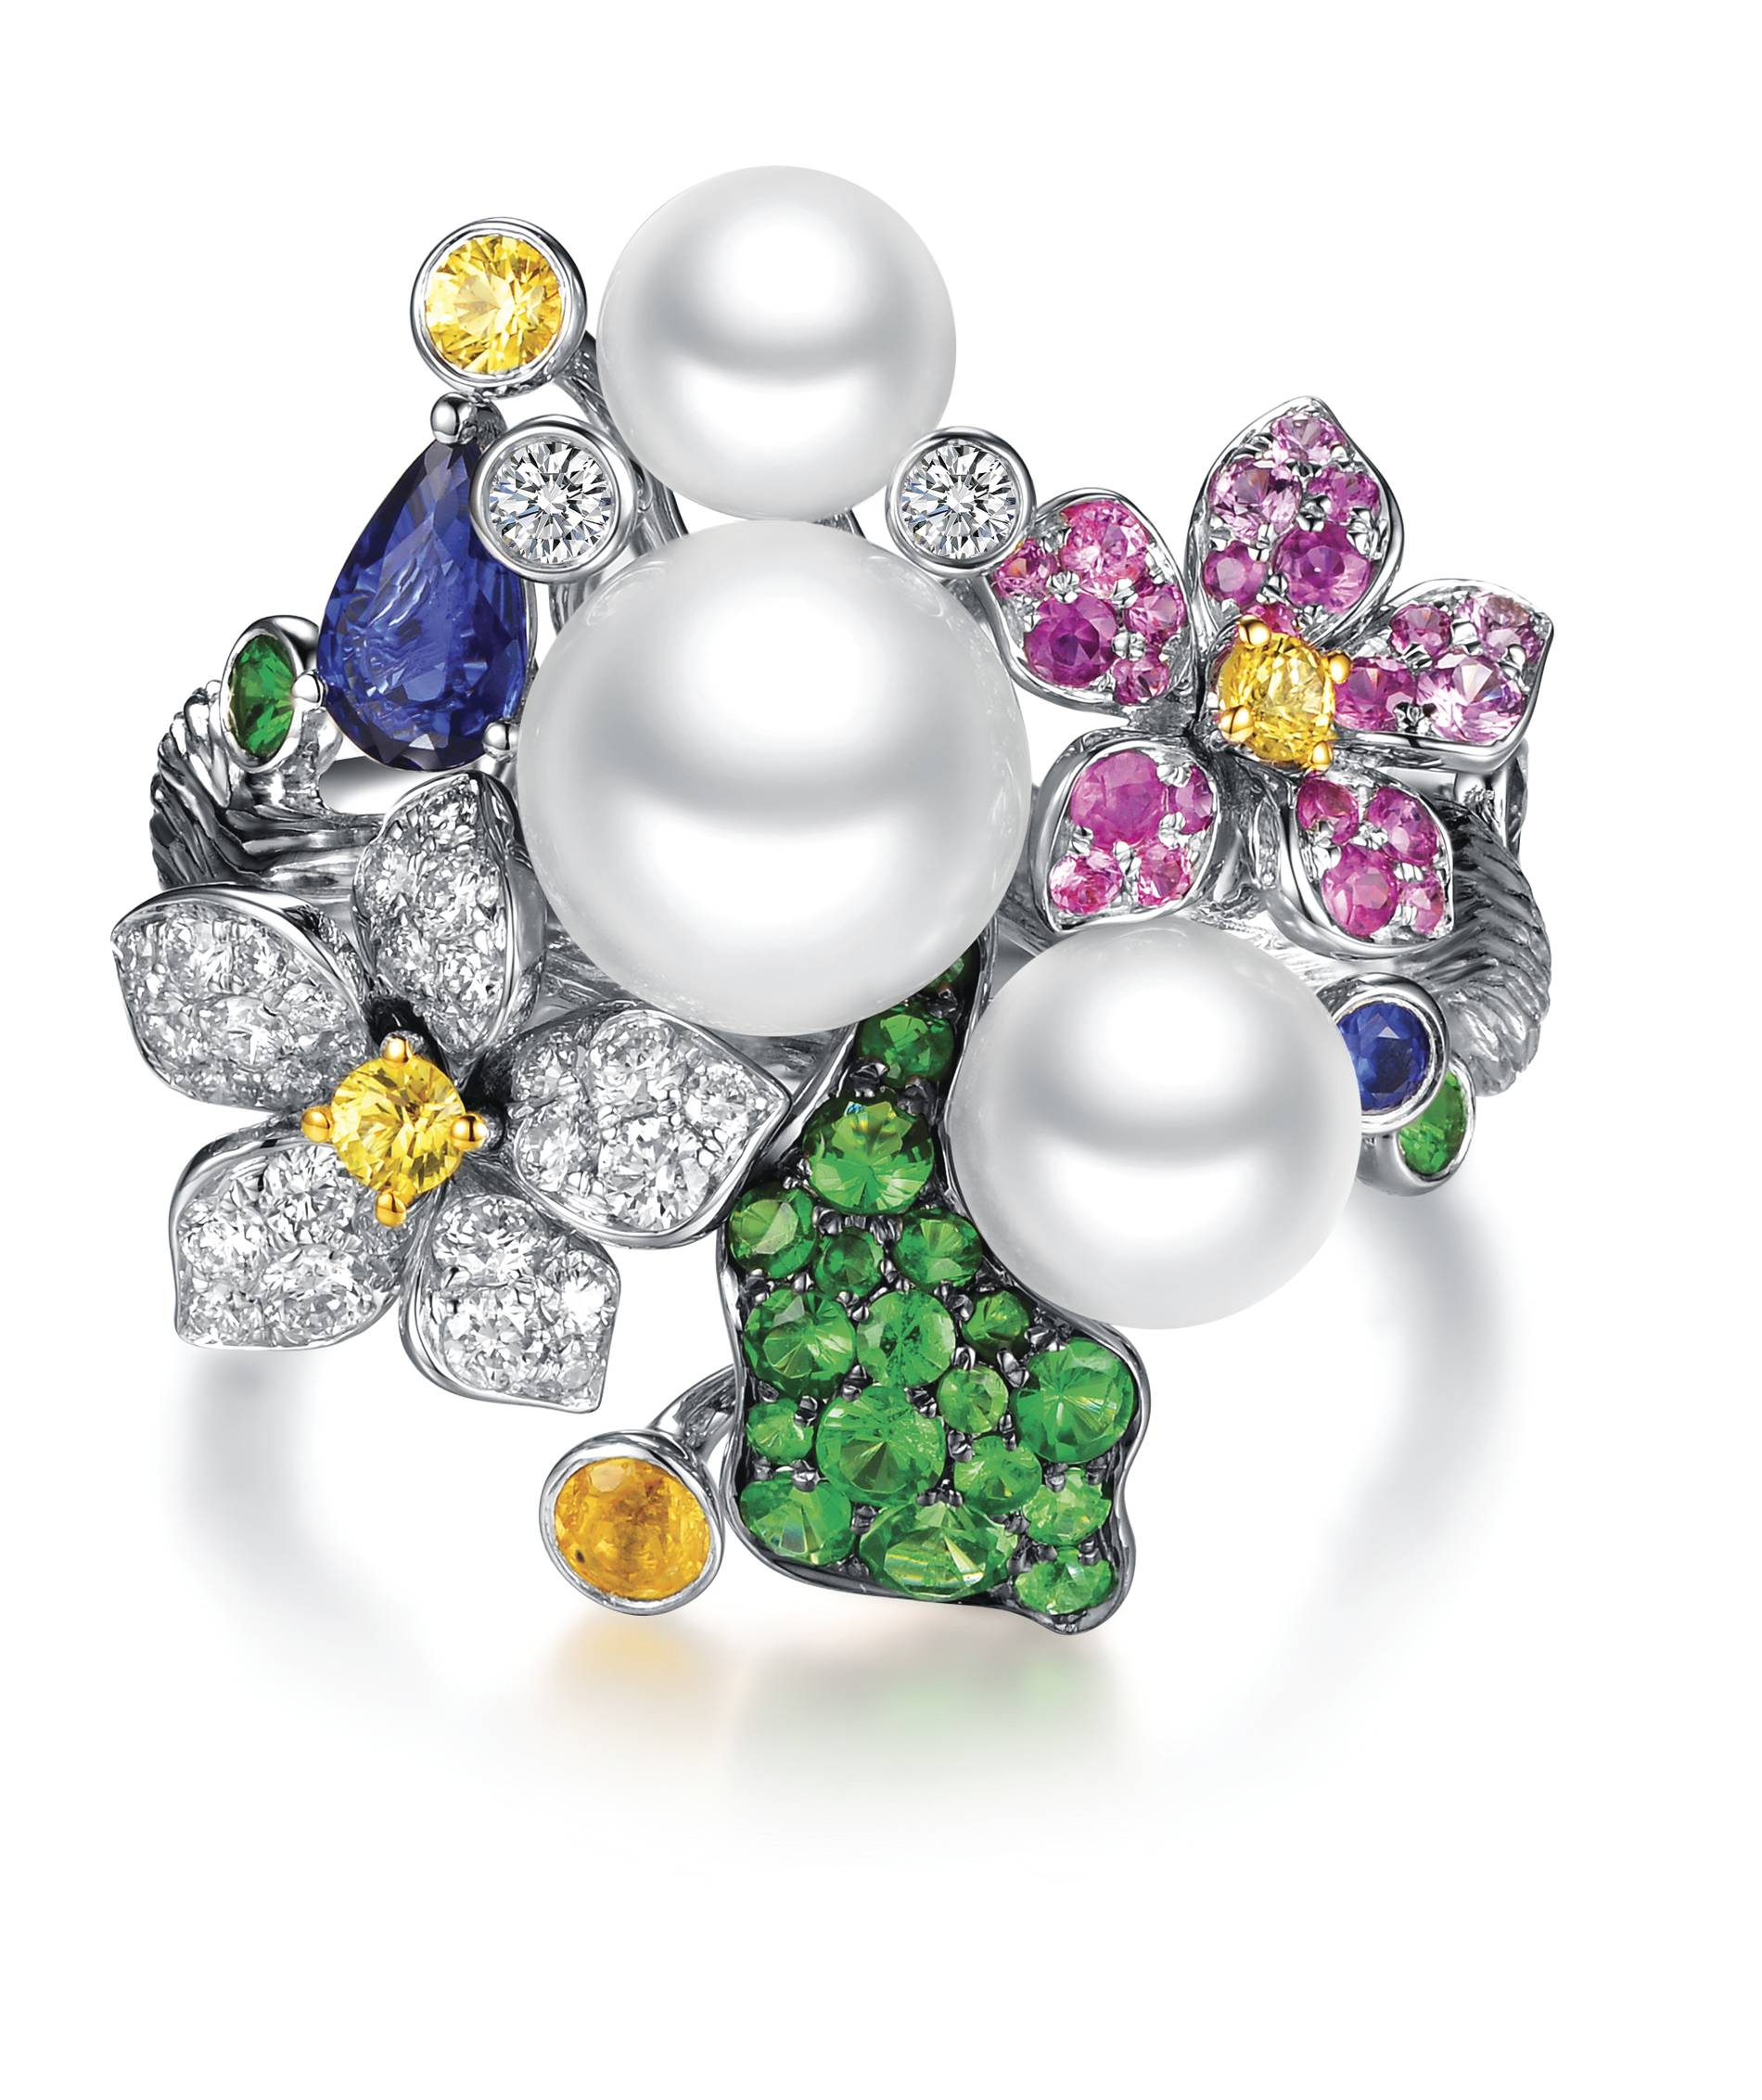 Faberge x James Ganh ring jewelry